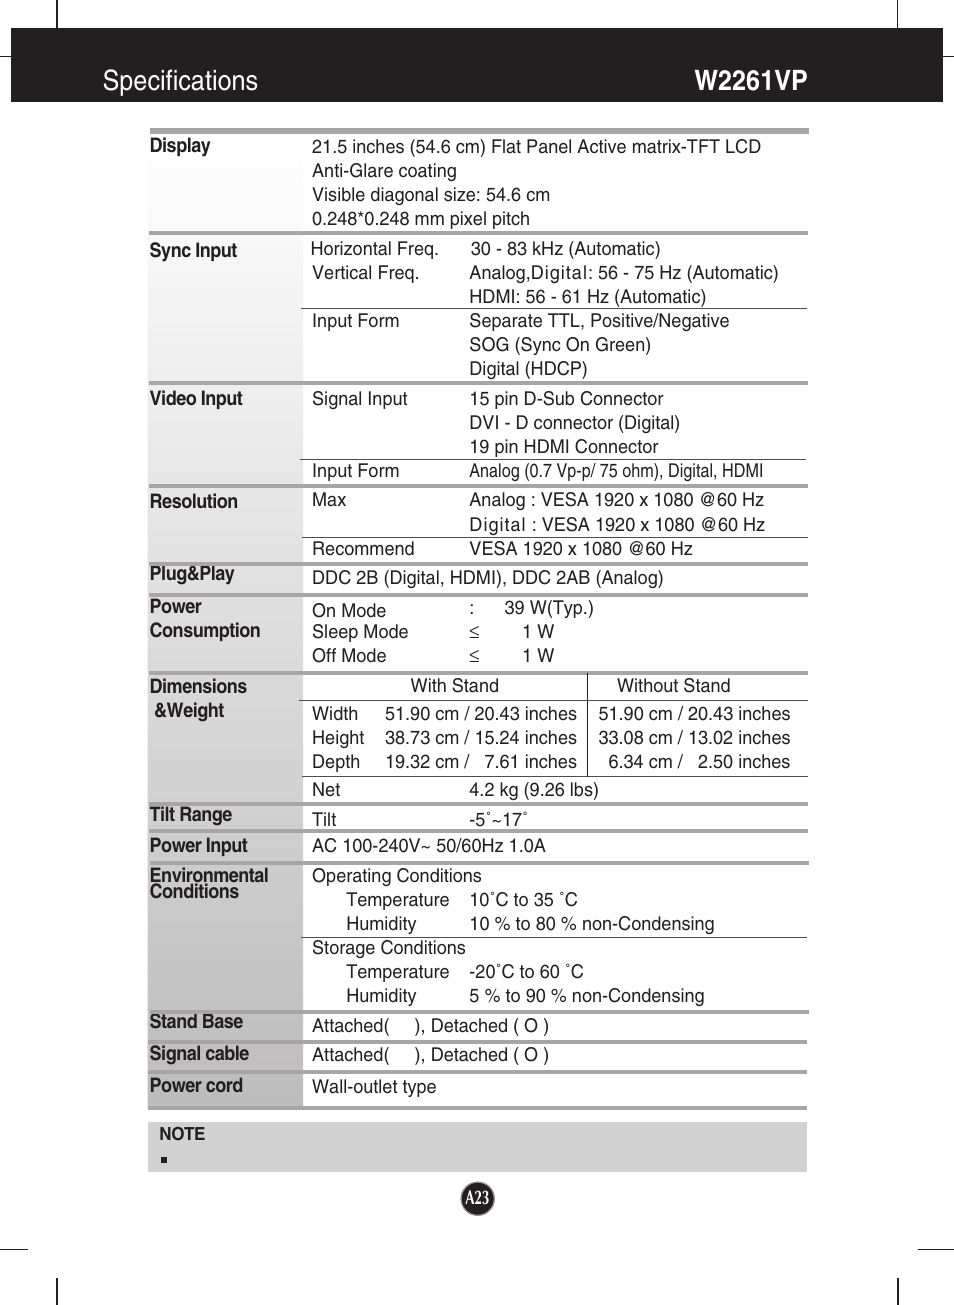 Specifications, W2261vp, Specifications w2261vp | LG W2361V-PF User Manual | Page 24 / 29